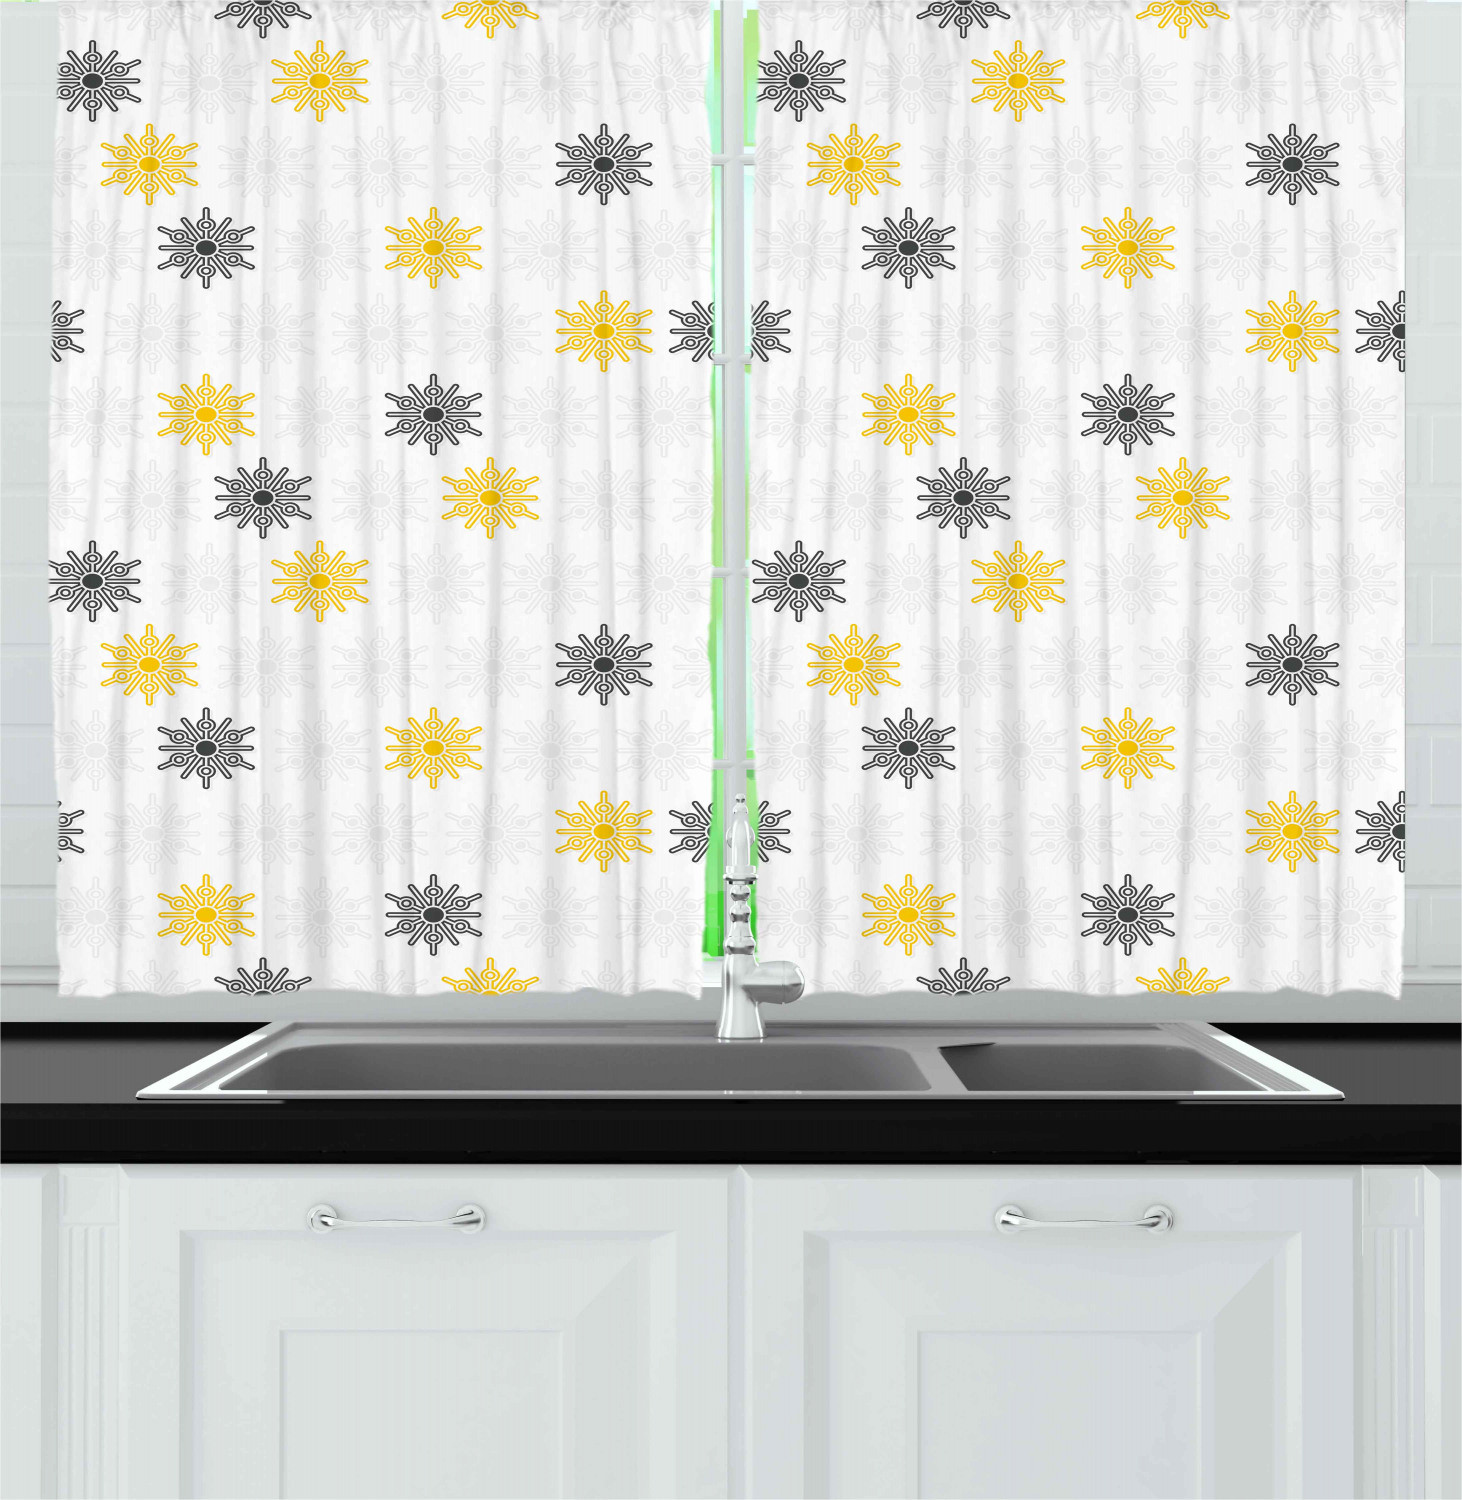 Yellow And Grey Kitchen Curtains
 Grey and Yellow Kitchen Curtains 2 Panel Set Window Drapes